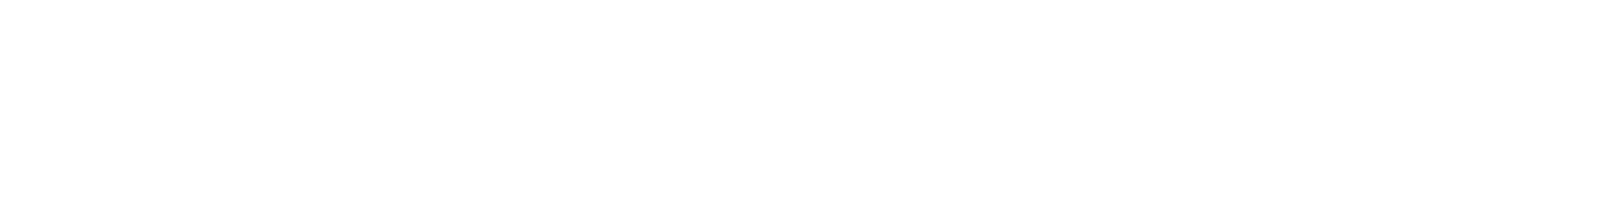 Burberry logo in transparent PNG and vectorized SVG formats